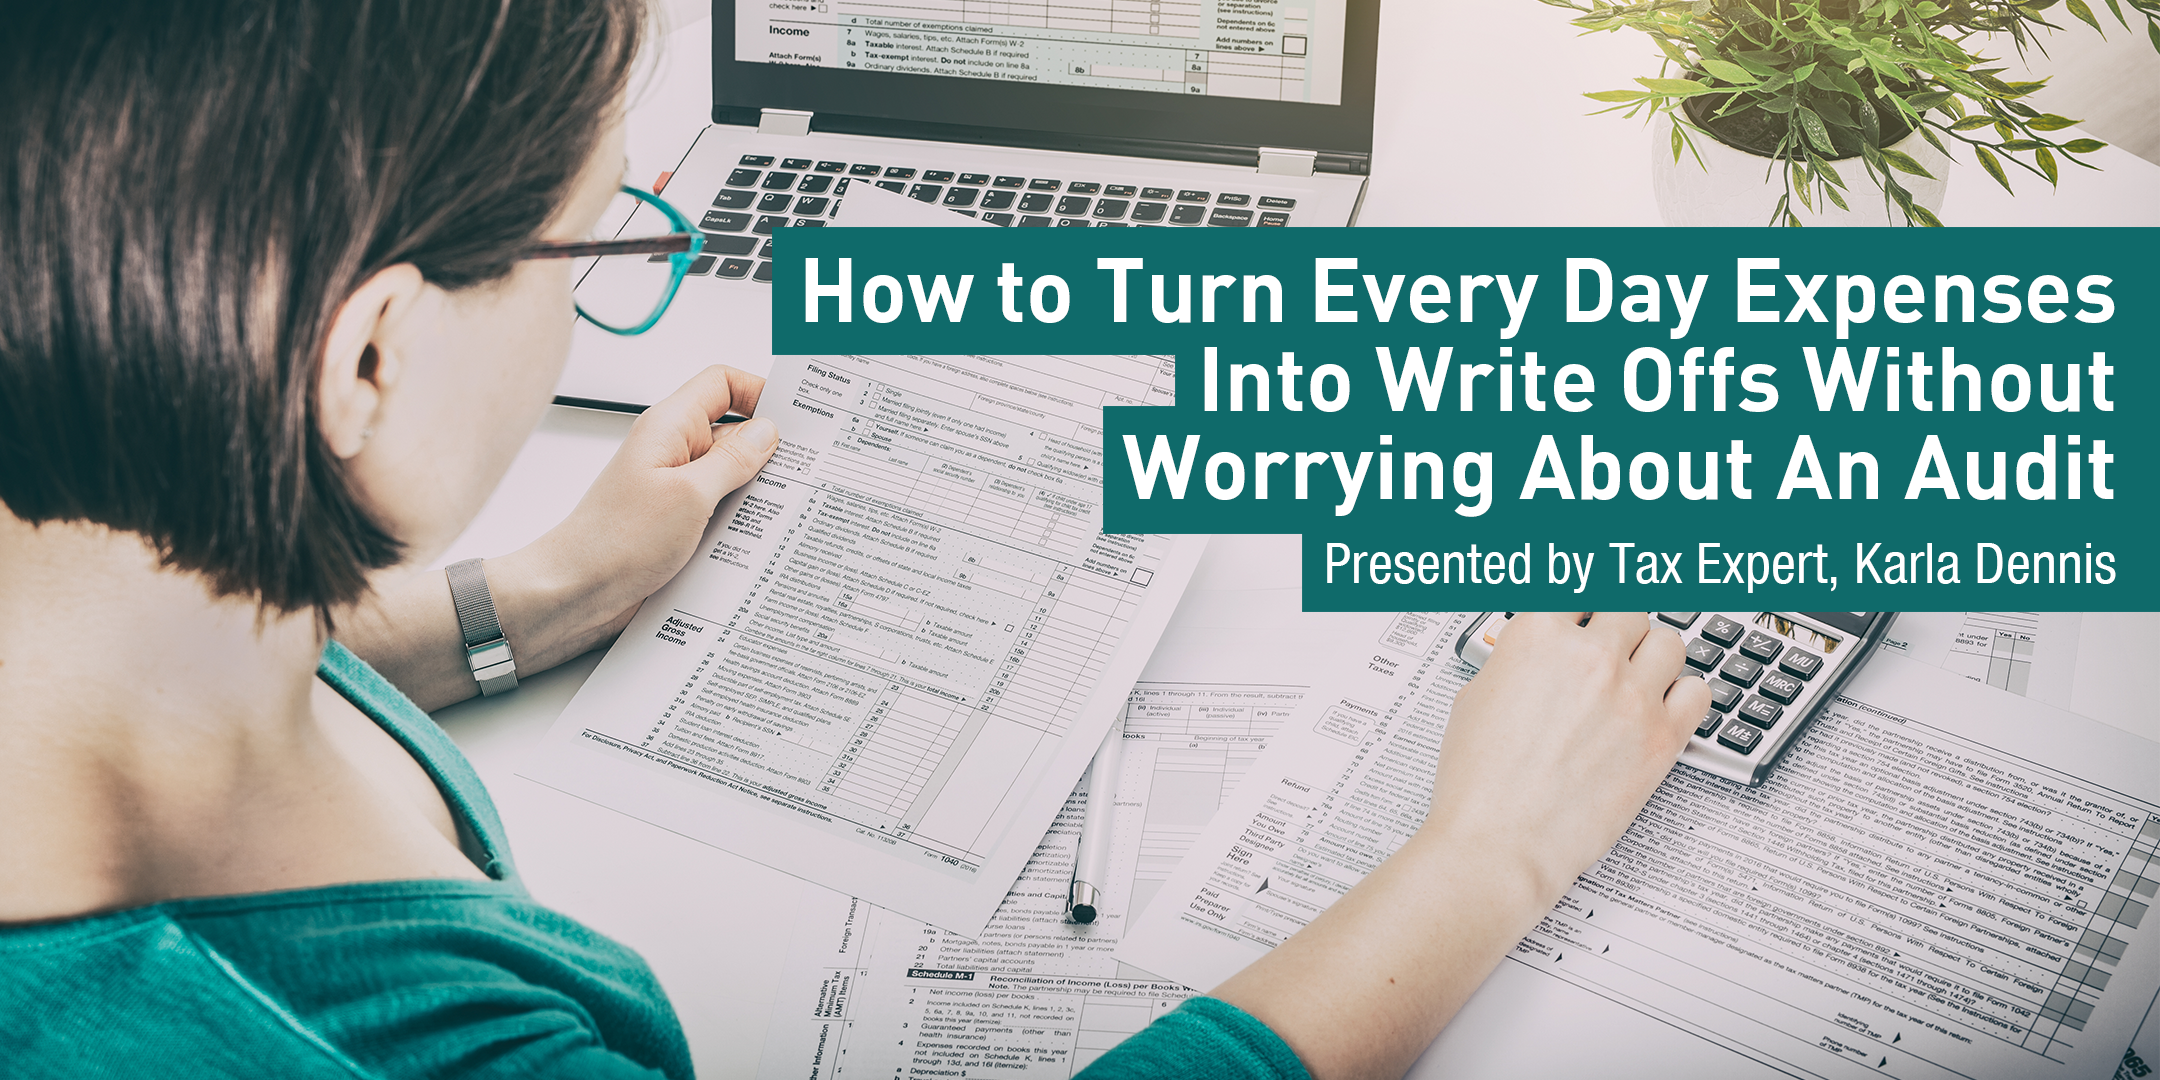 How to Turn Every Day Expenses Into Write Offs Without Worrying About An Audit (TOR)